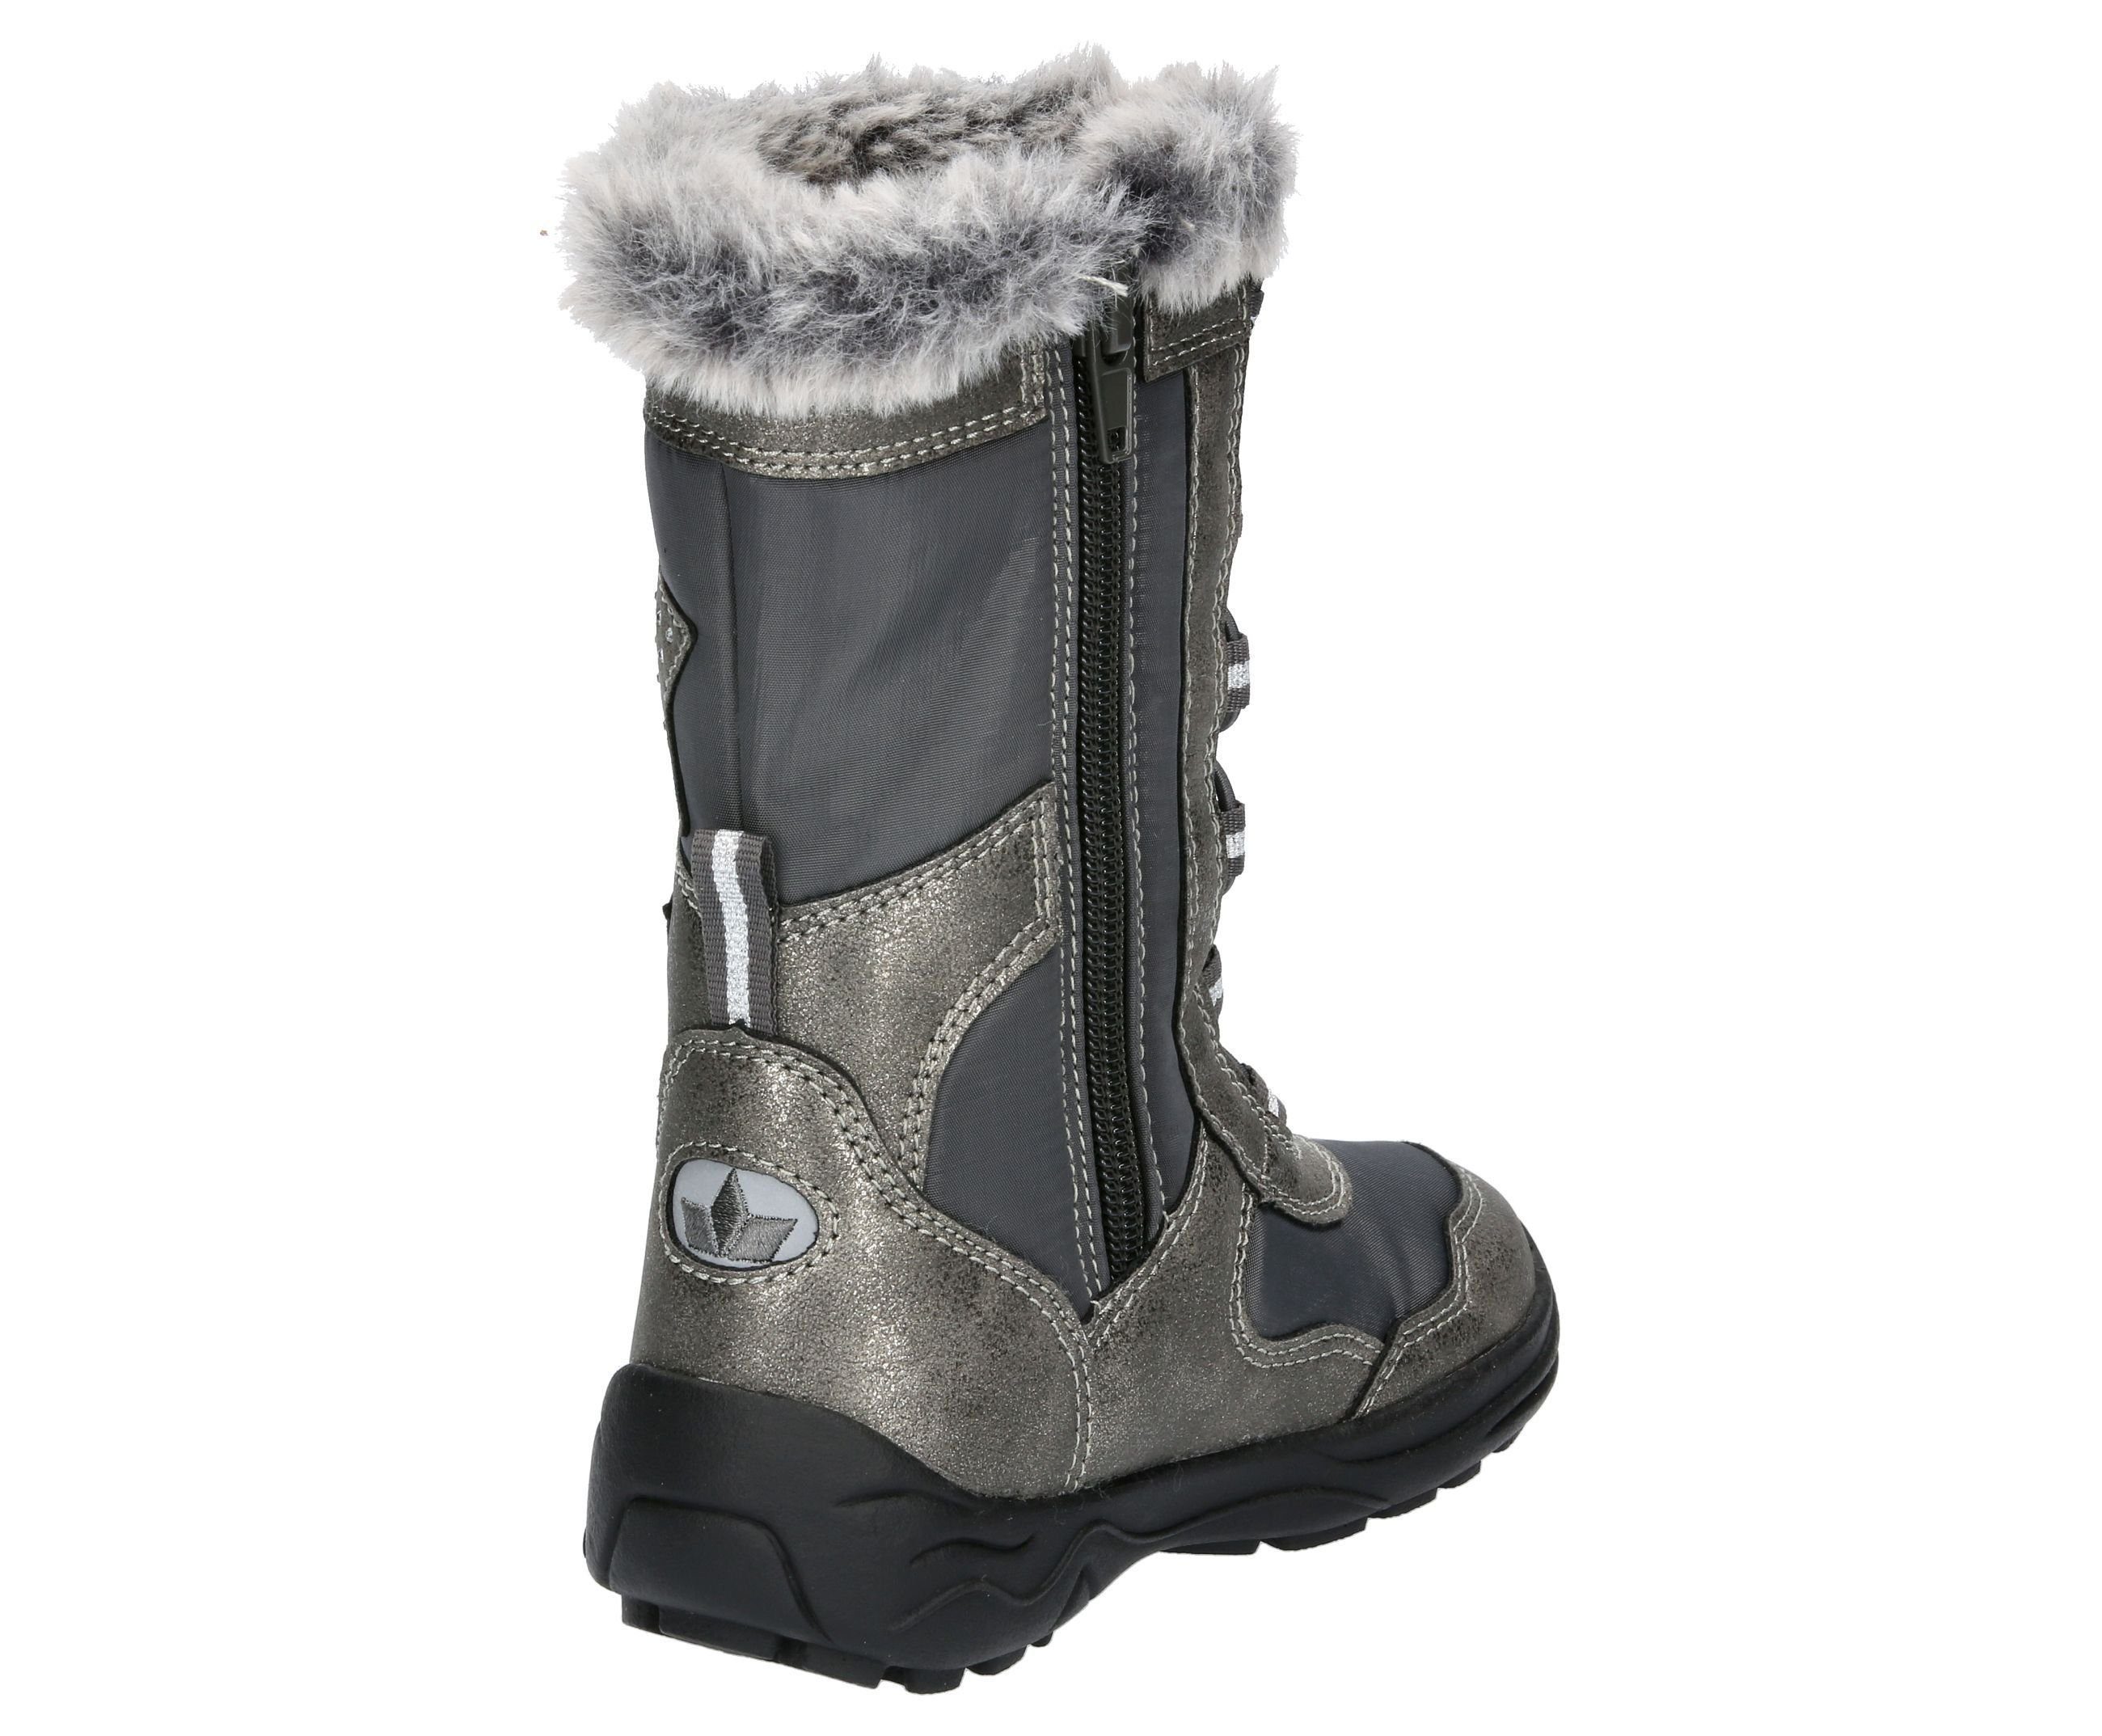 Winterboot Cathrin Lico Winterboots